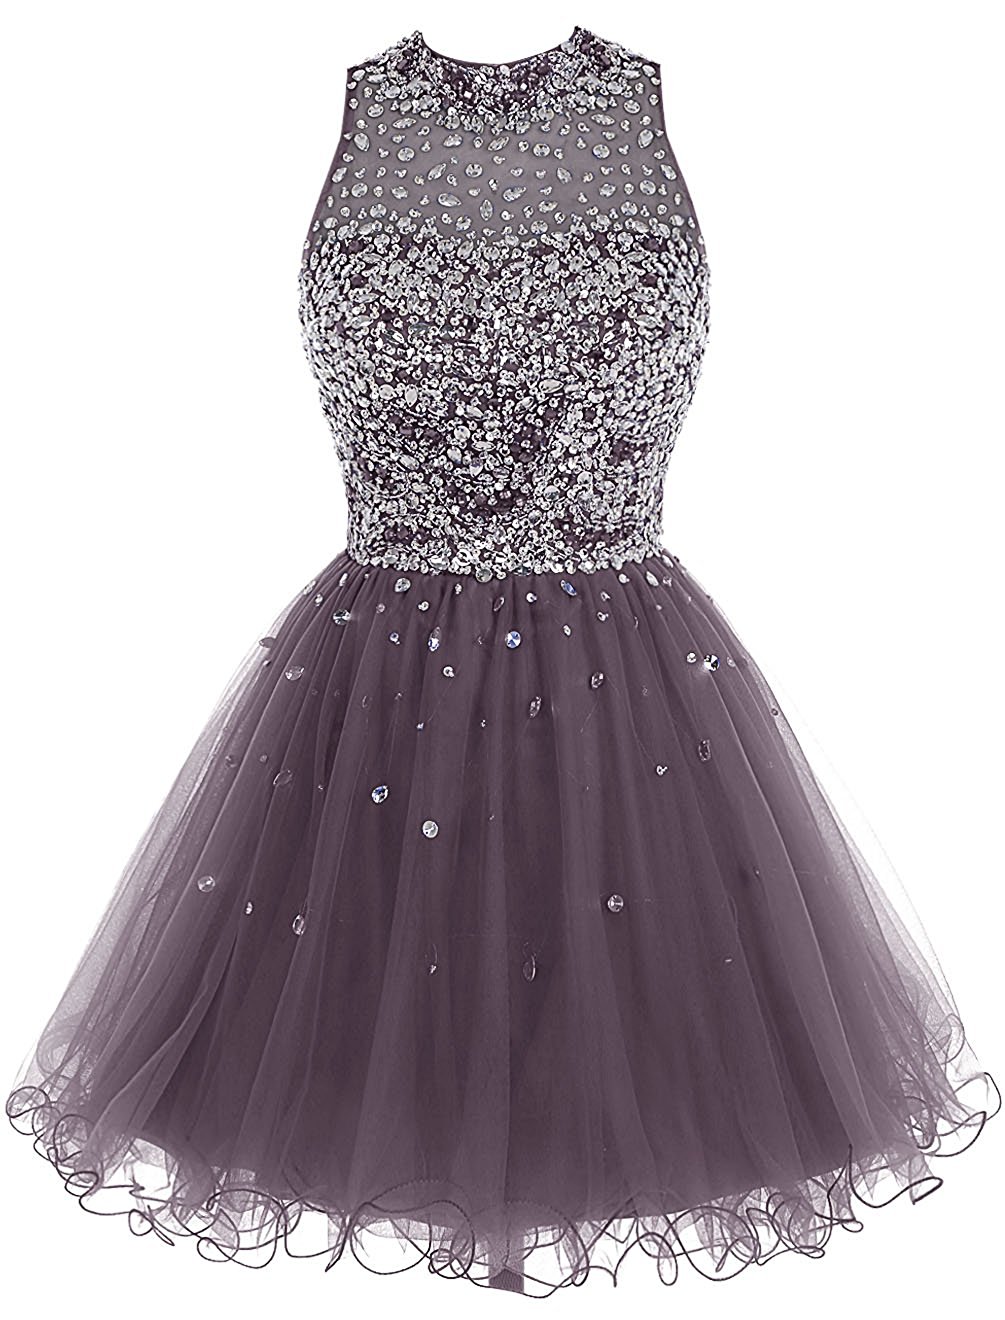 dresses for homecoming dance